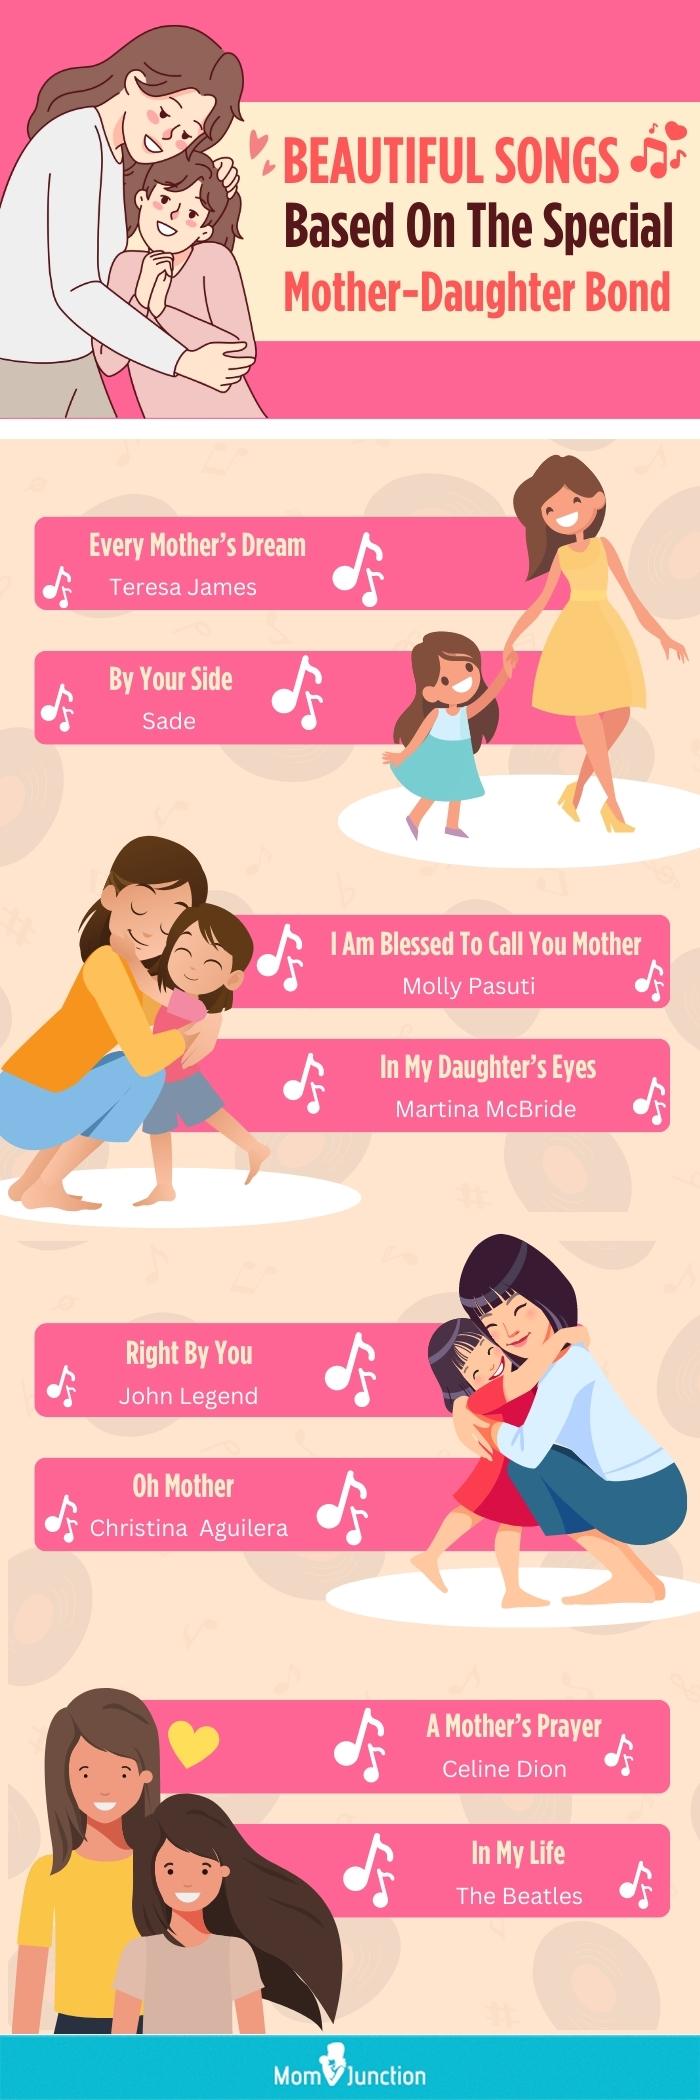 beautiful songs based on the special mother daughter bond (infographic)